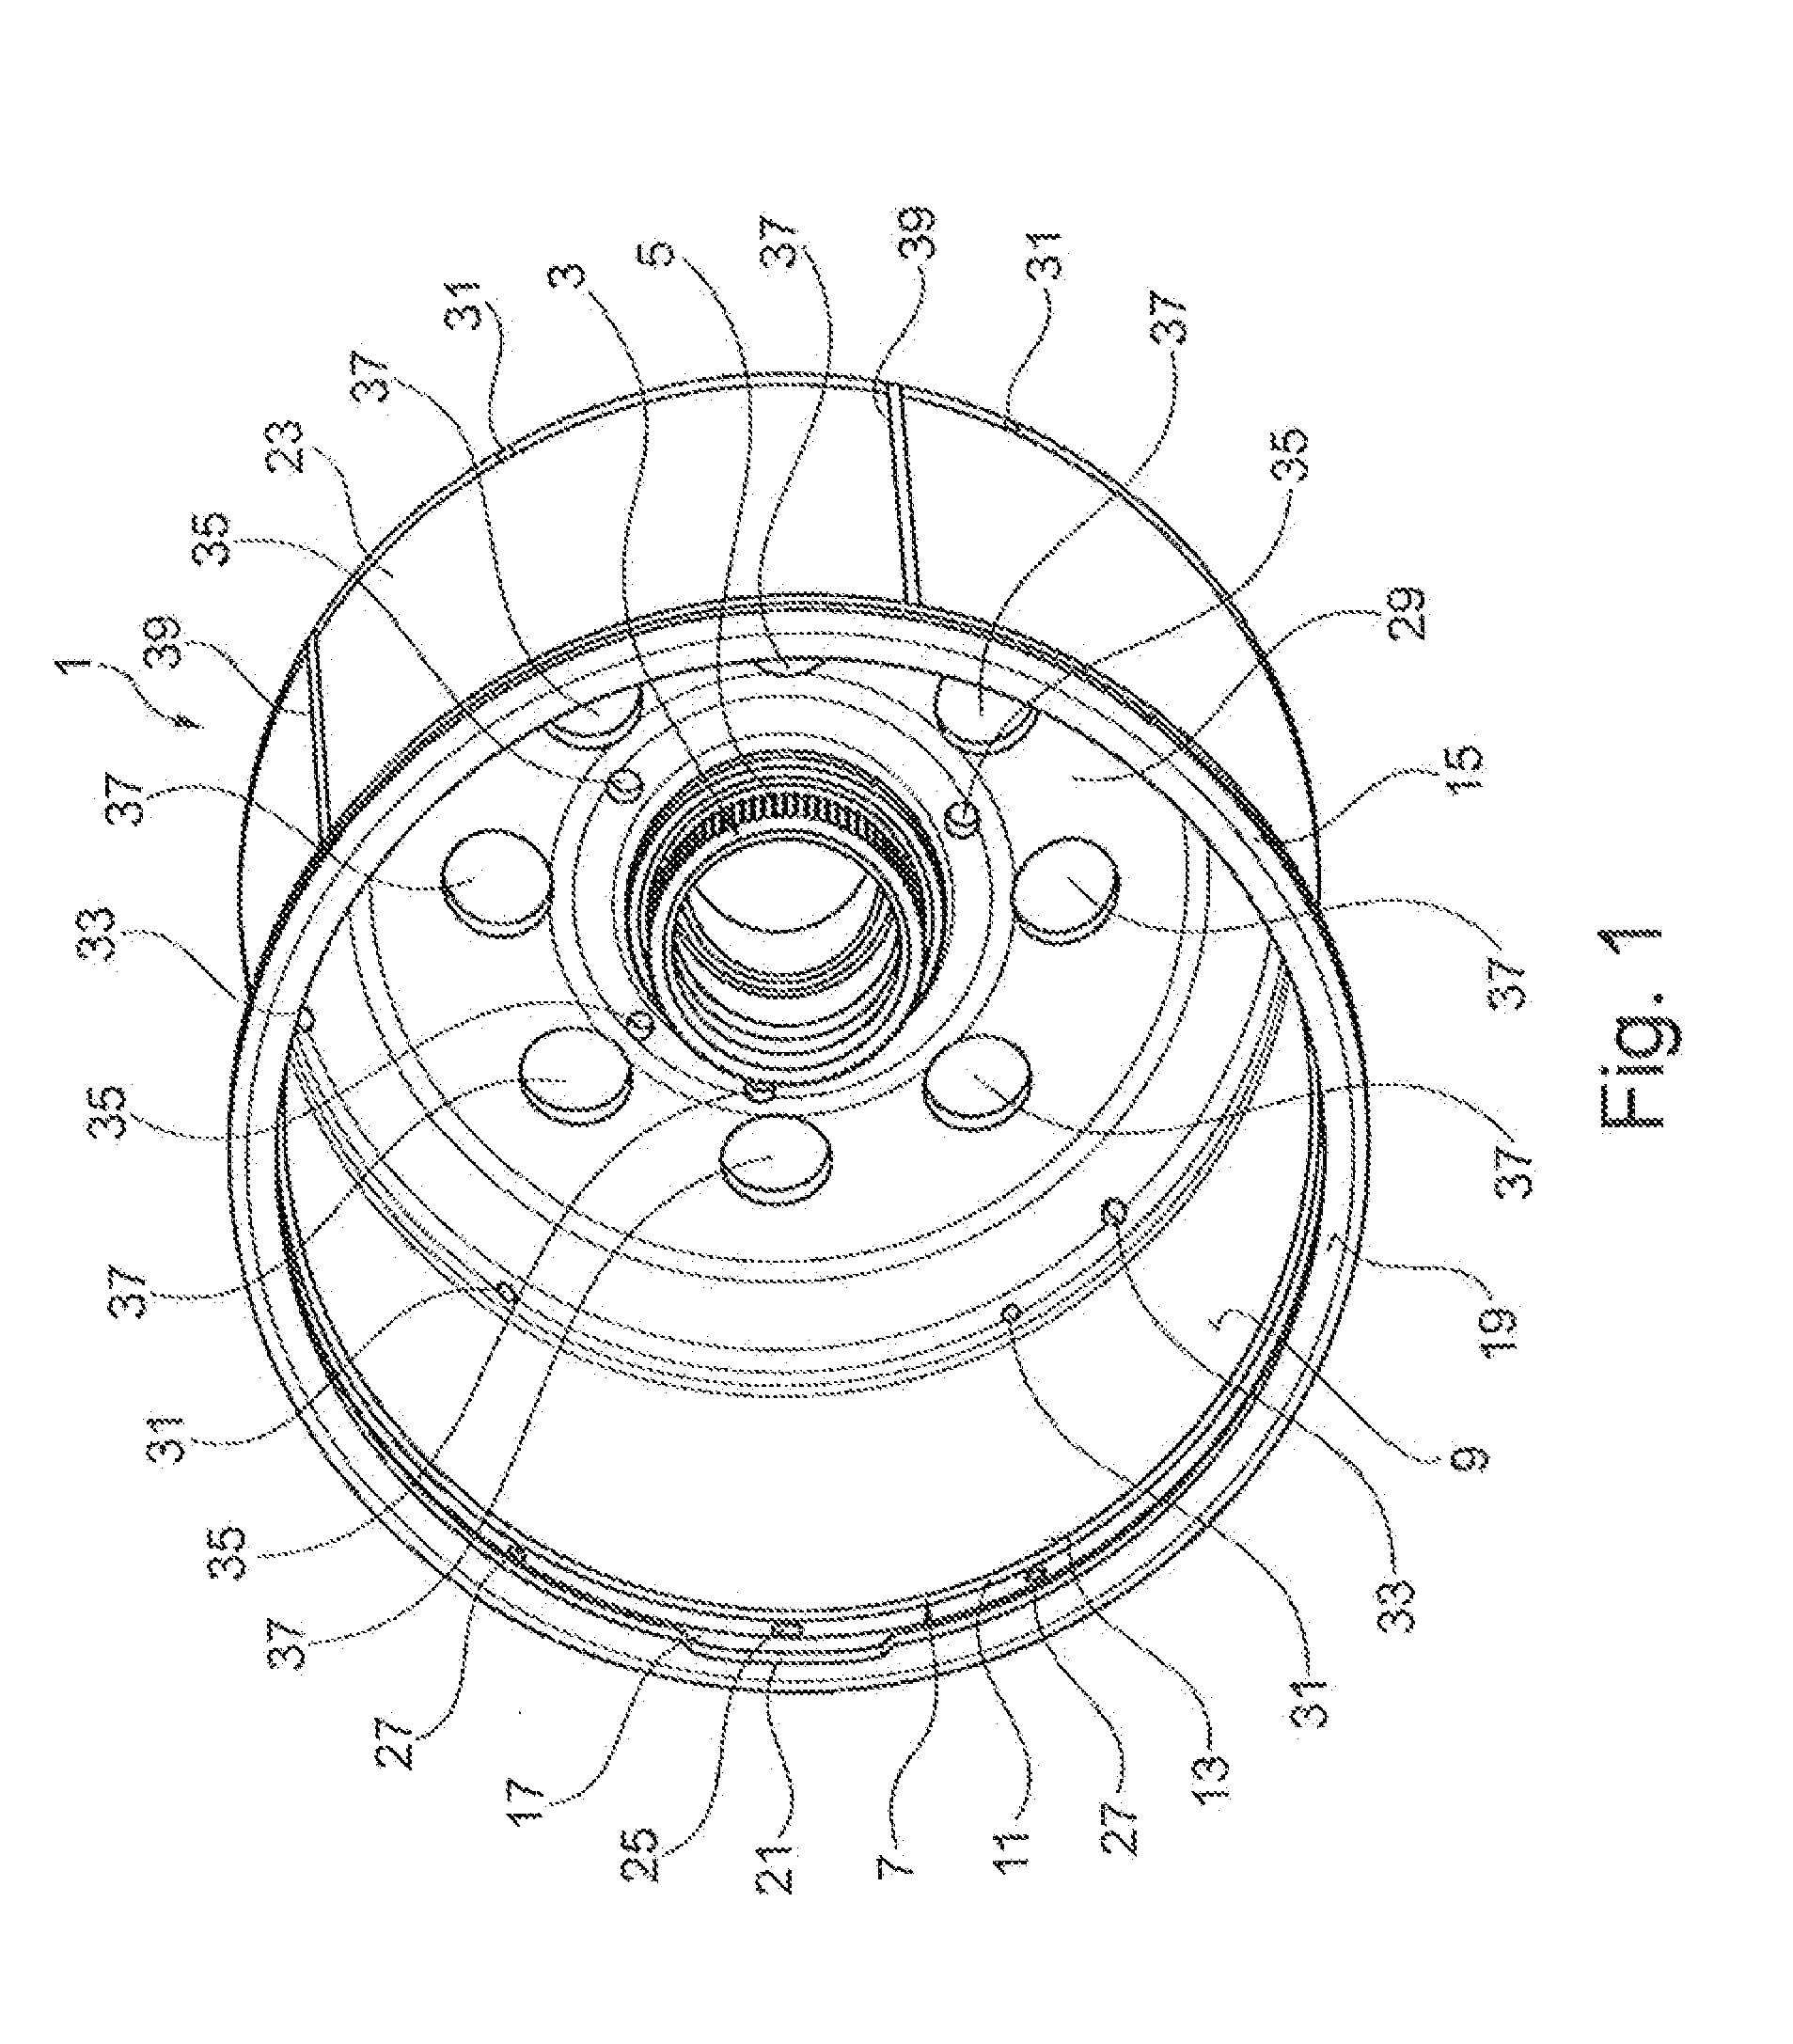 Rotor Support and Method for Producing a Rotor Support